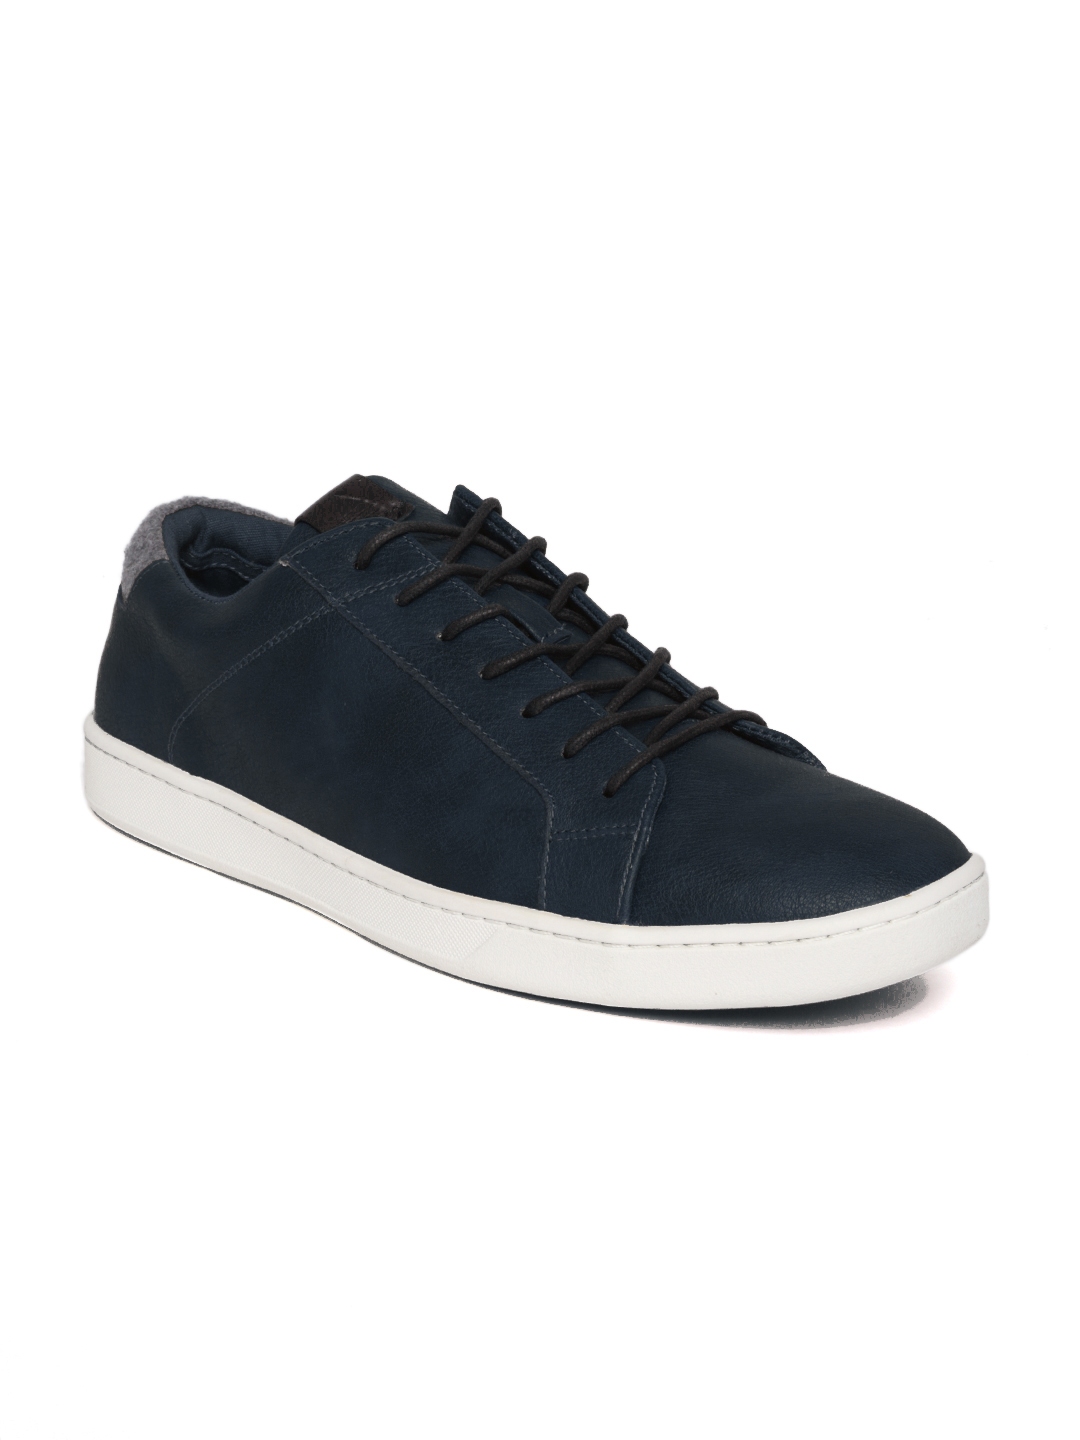 Buy ALDO Men Navy Leather Casual Shoes - Casual Shoes for Men 967521 ...